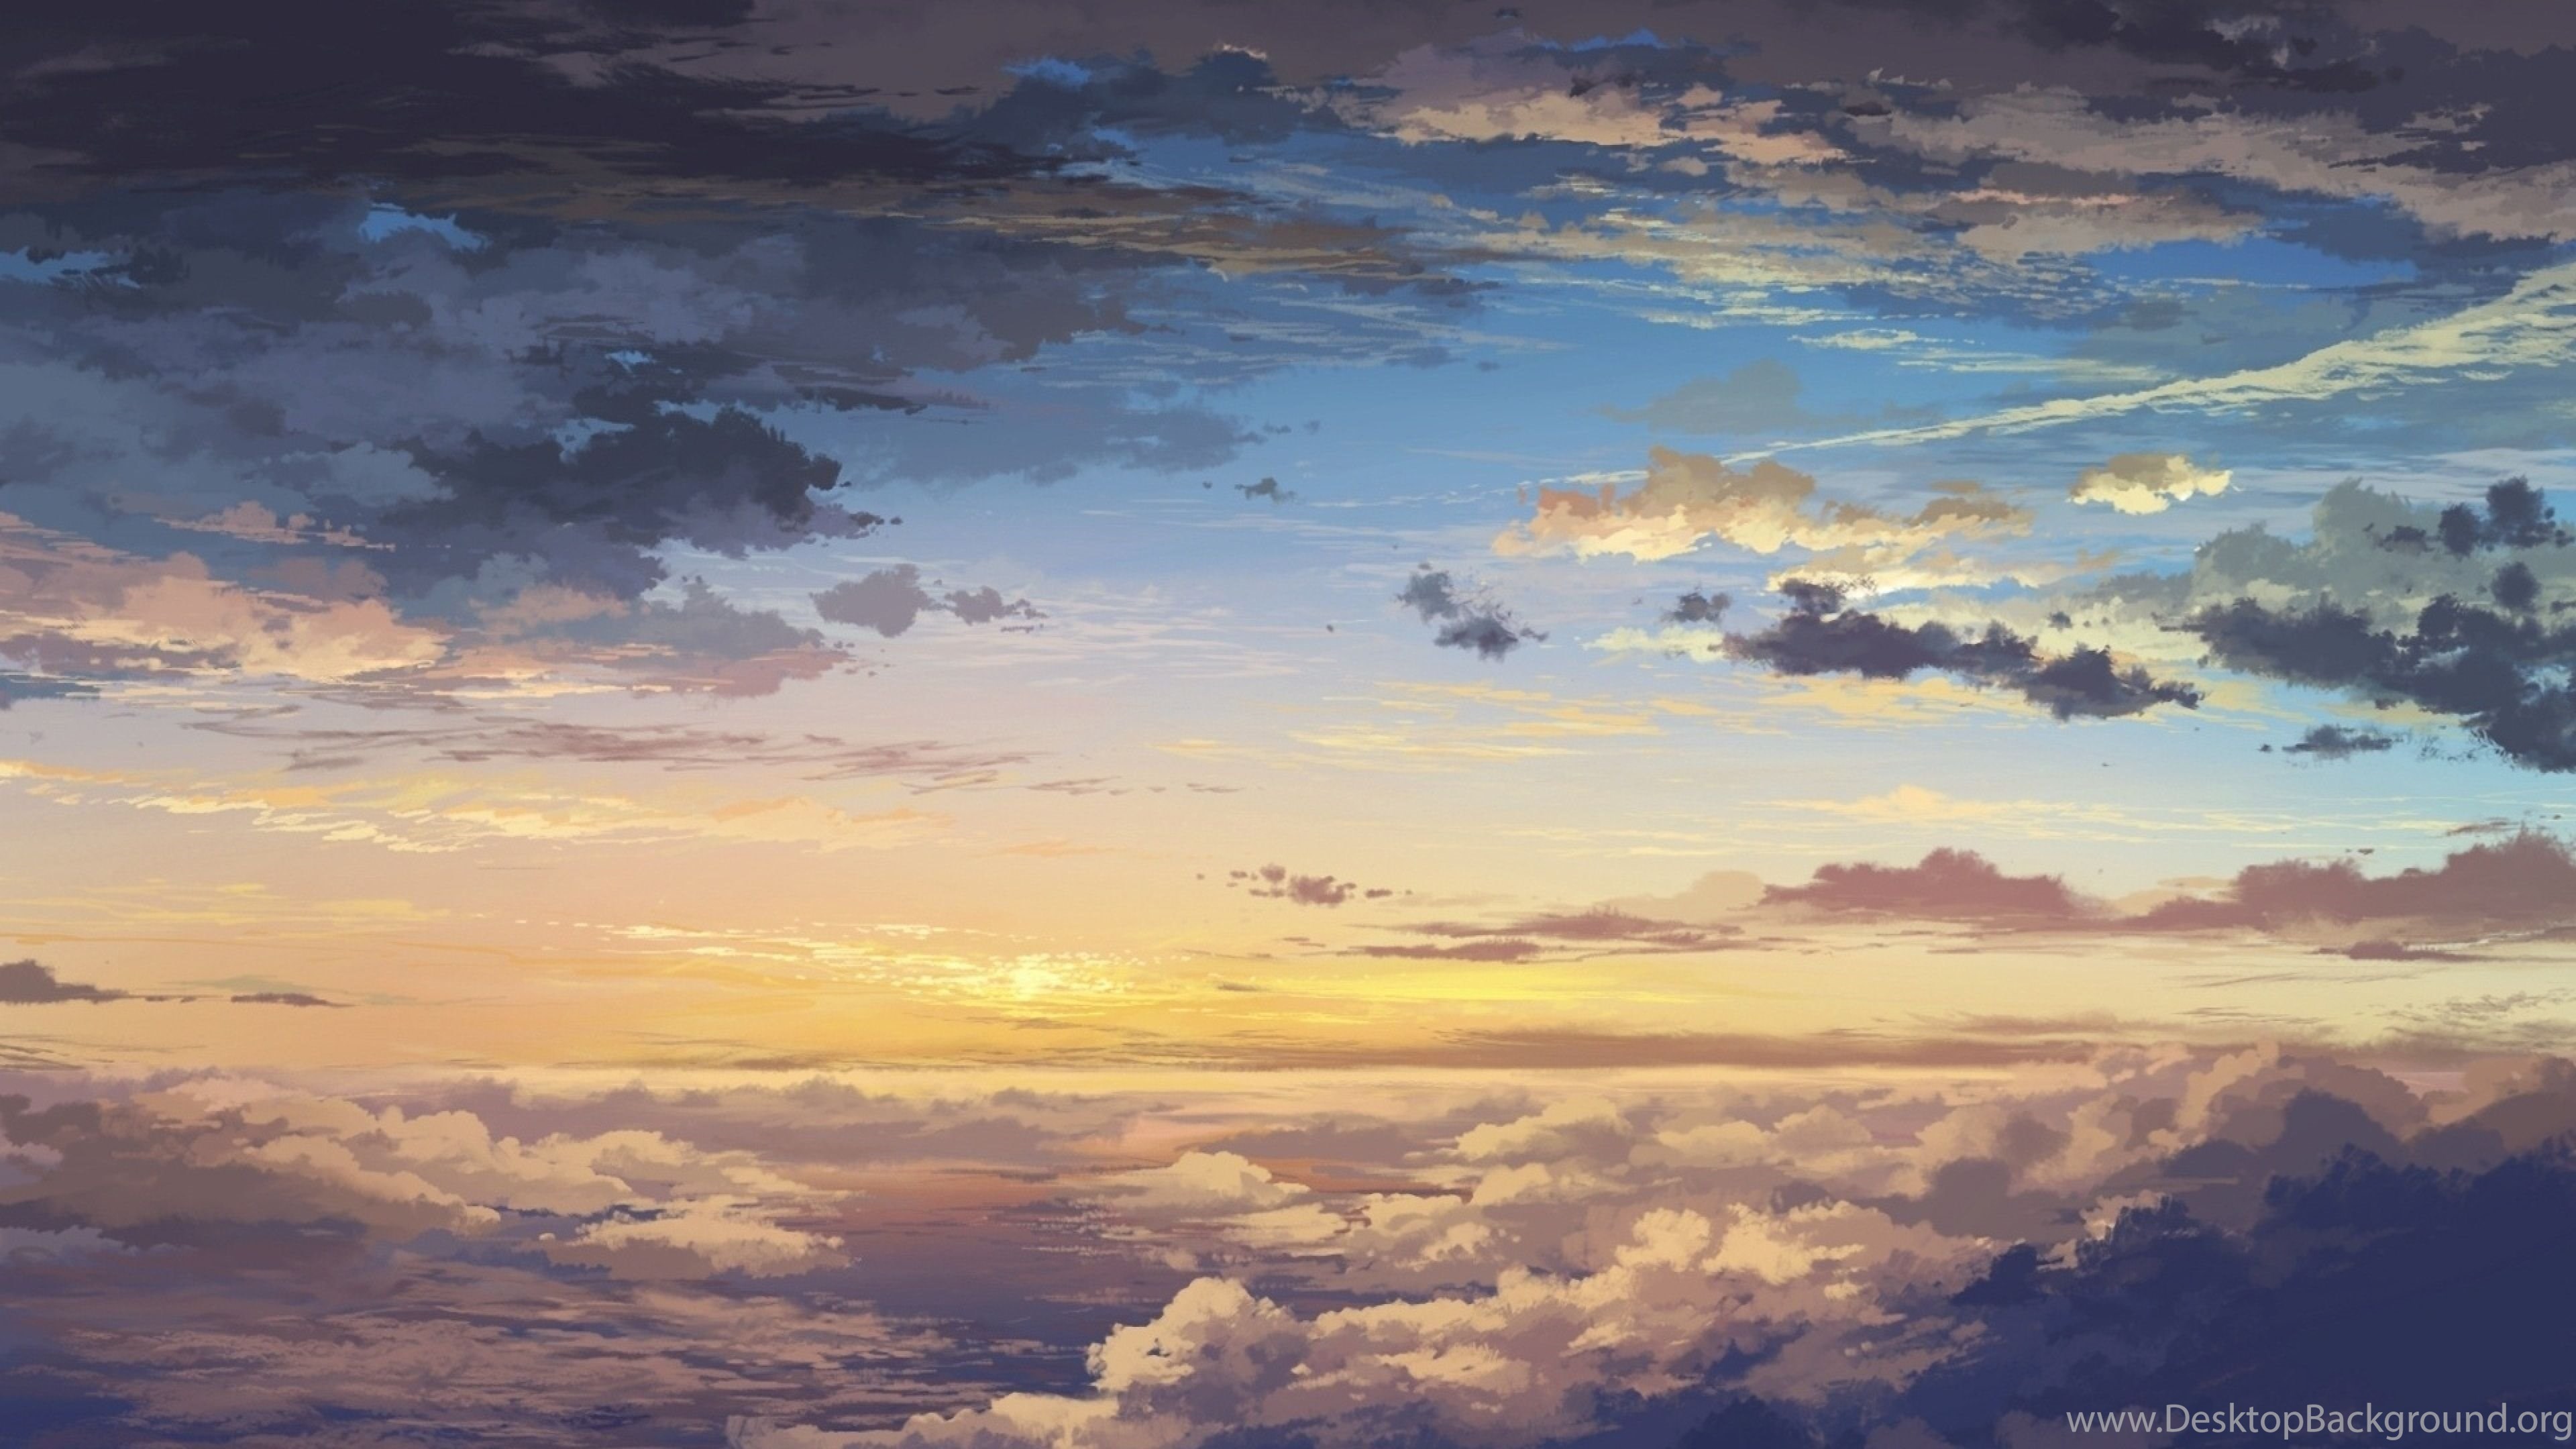 Download Wallpapers 3840x2160 Clouds Sky Art Sunset 